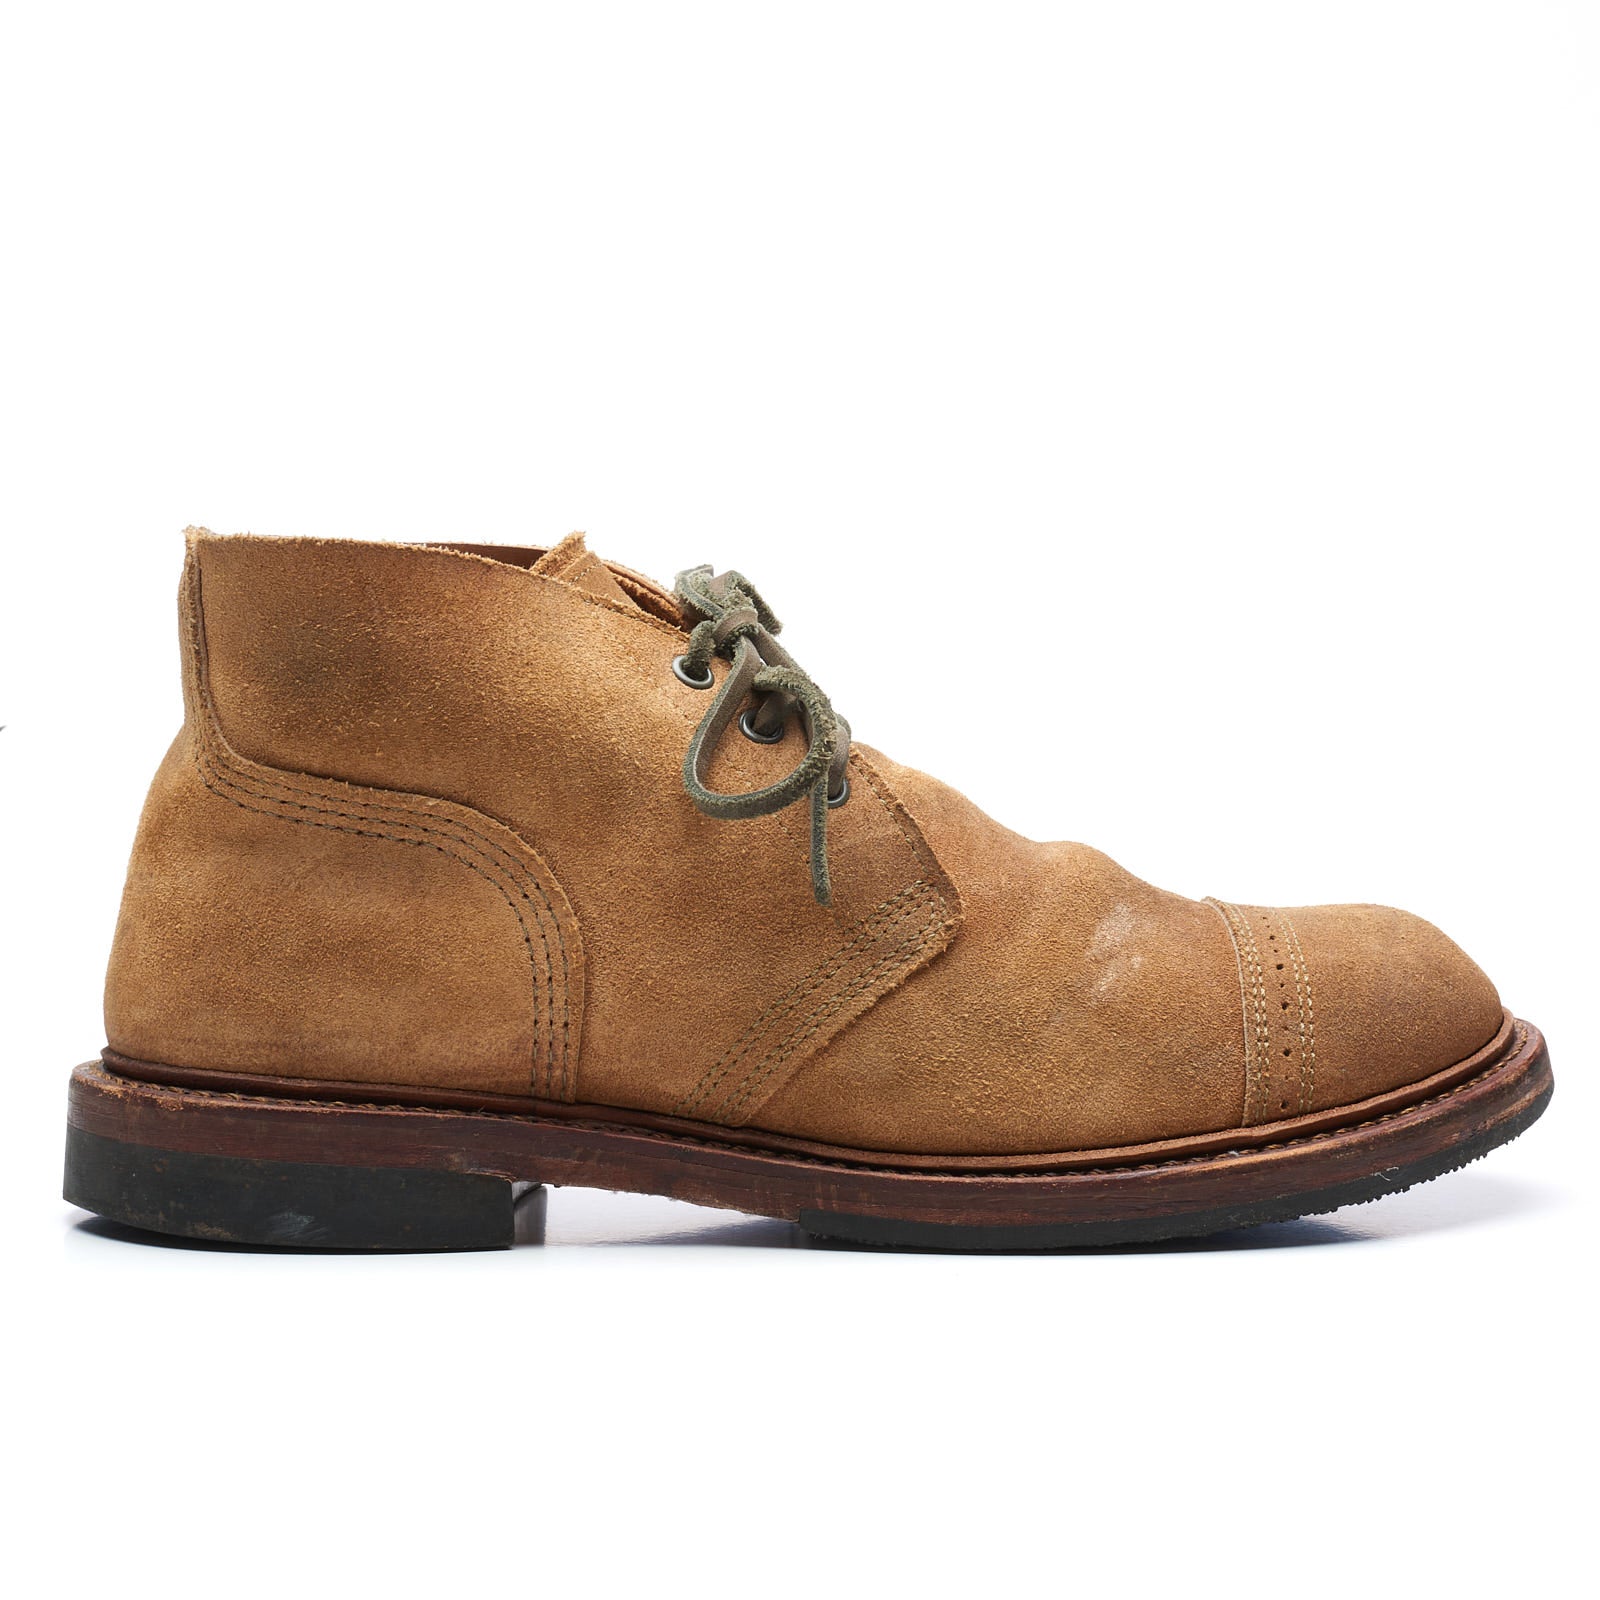 RED WING X NIGEL CABOURN 4632 Heritage Chukka Boots US 10 D Munson Limited Ed. RED WING SHOES